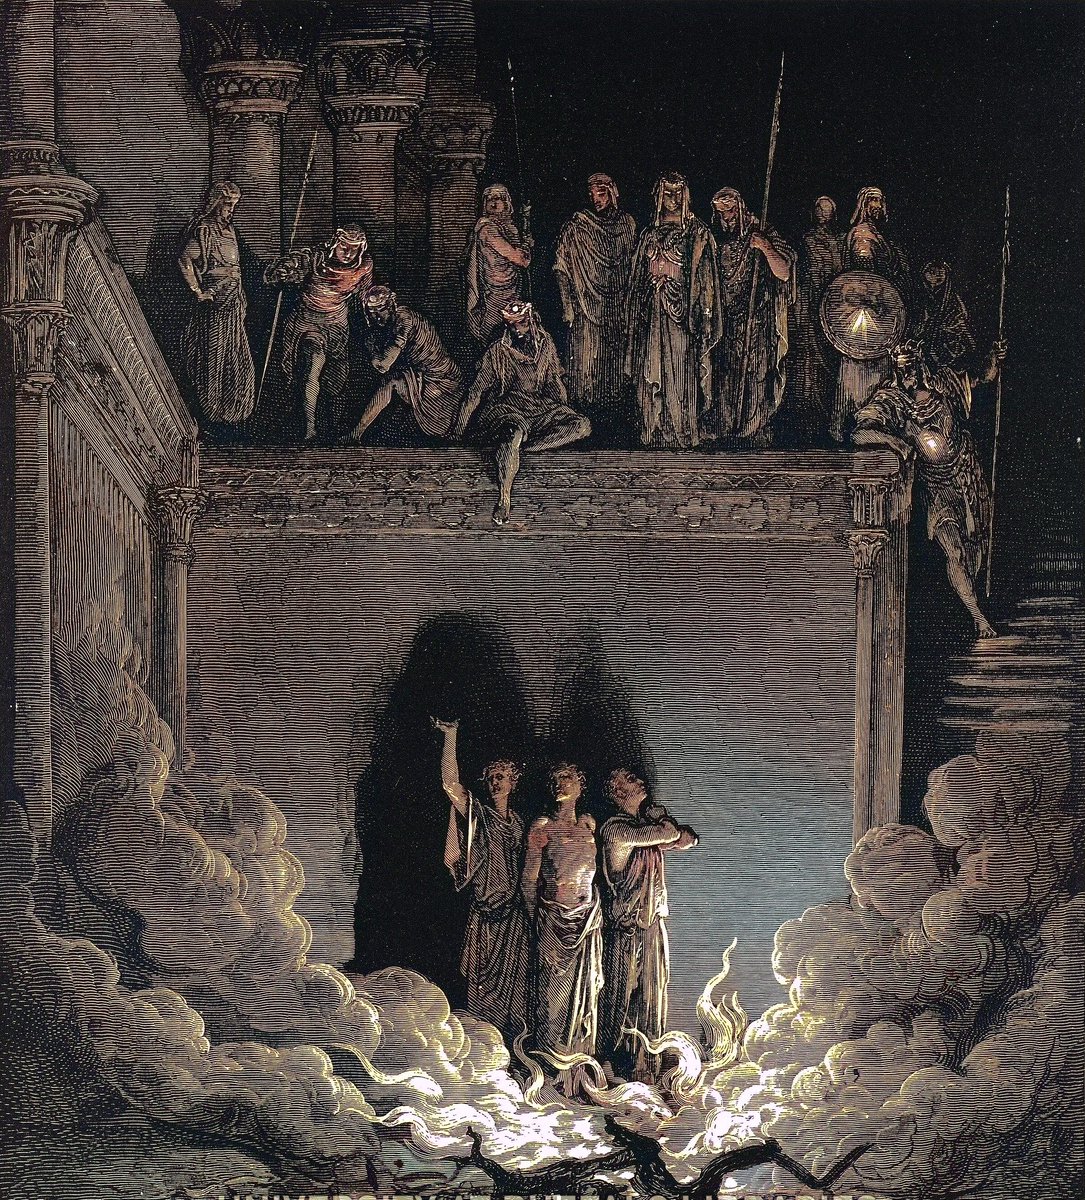 Gustave Doré: 'The Fiery Furnace,' 1880. See Daniel chapter 3 for details.